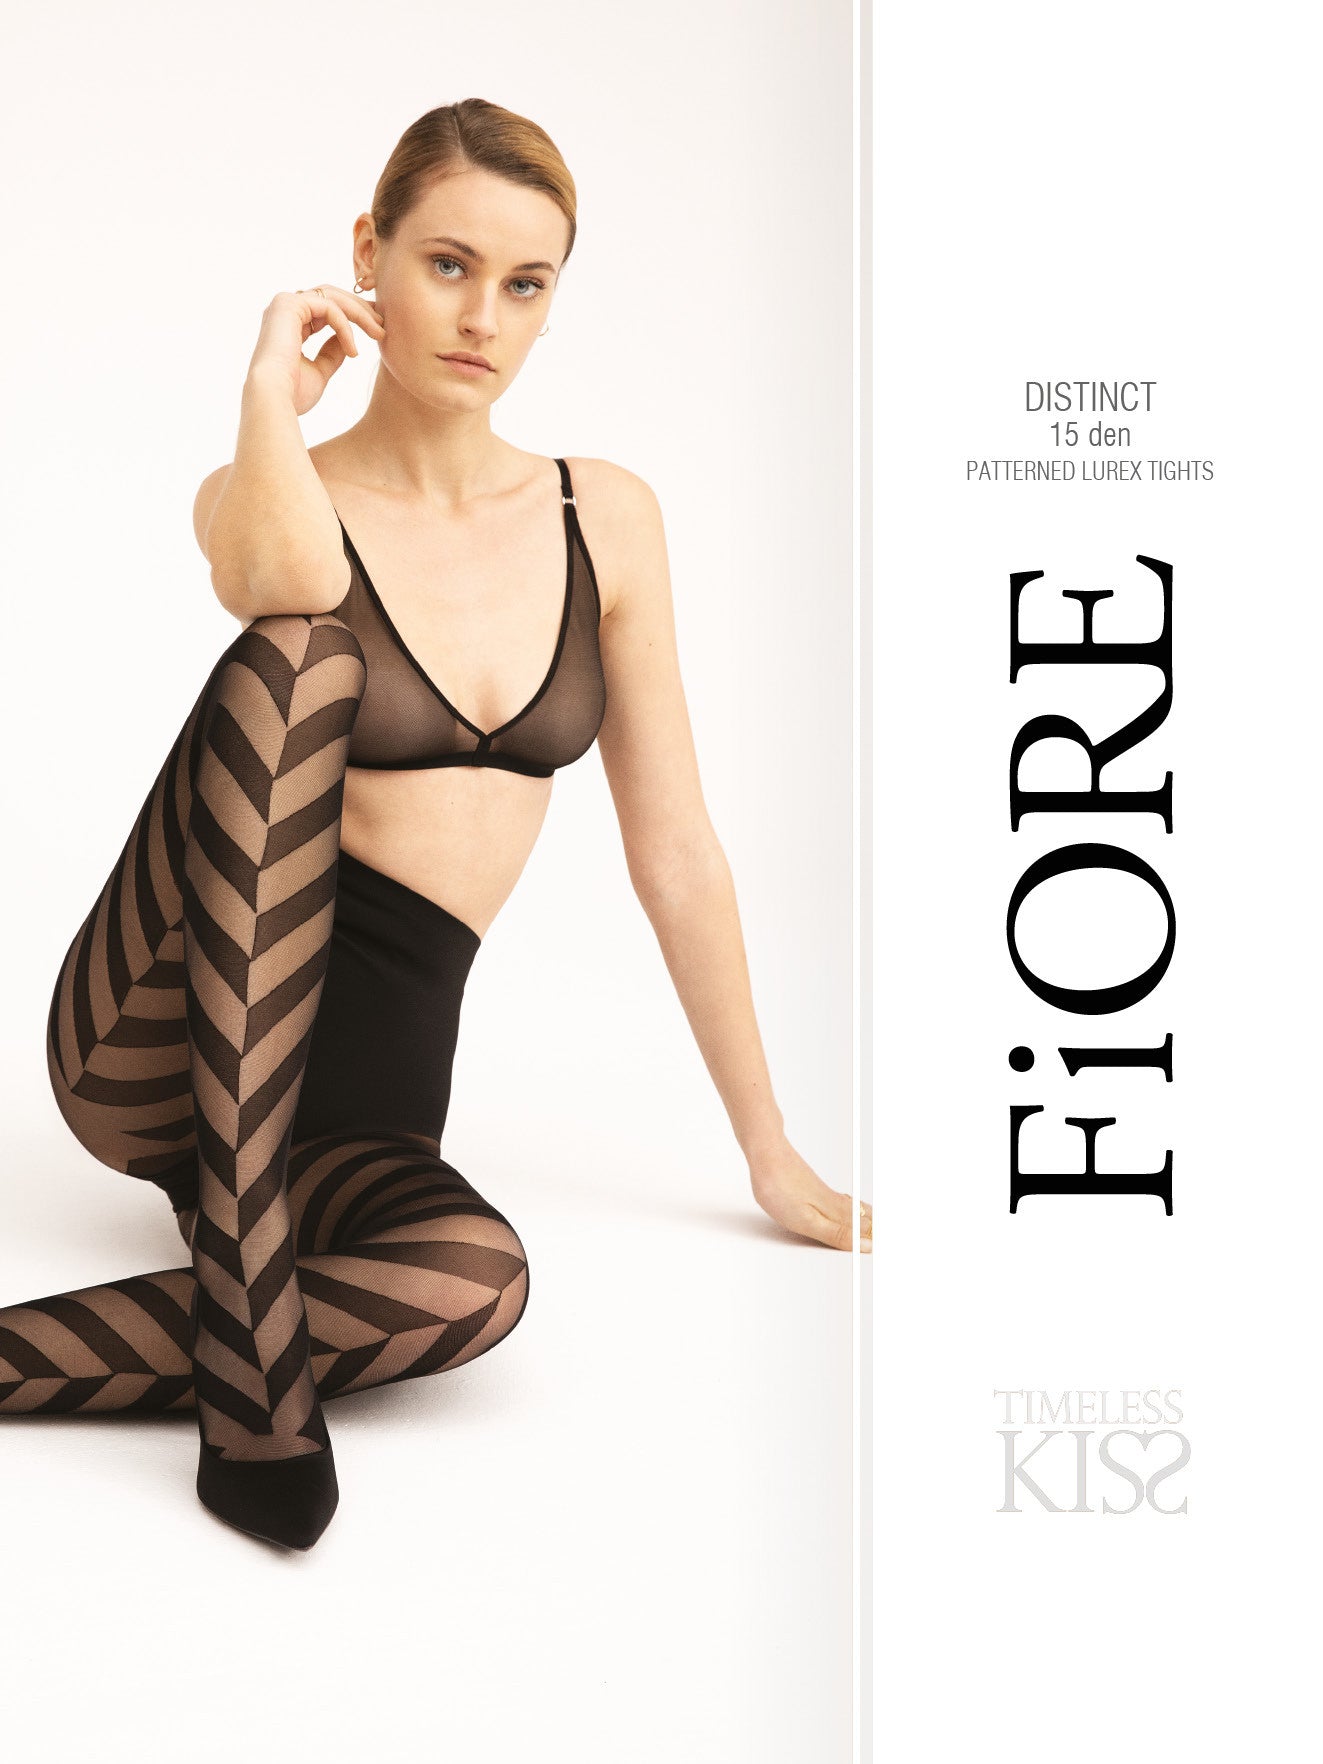 Fiore Impressa Patterned Tights In Stock At UK Tights